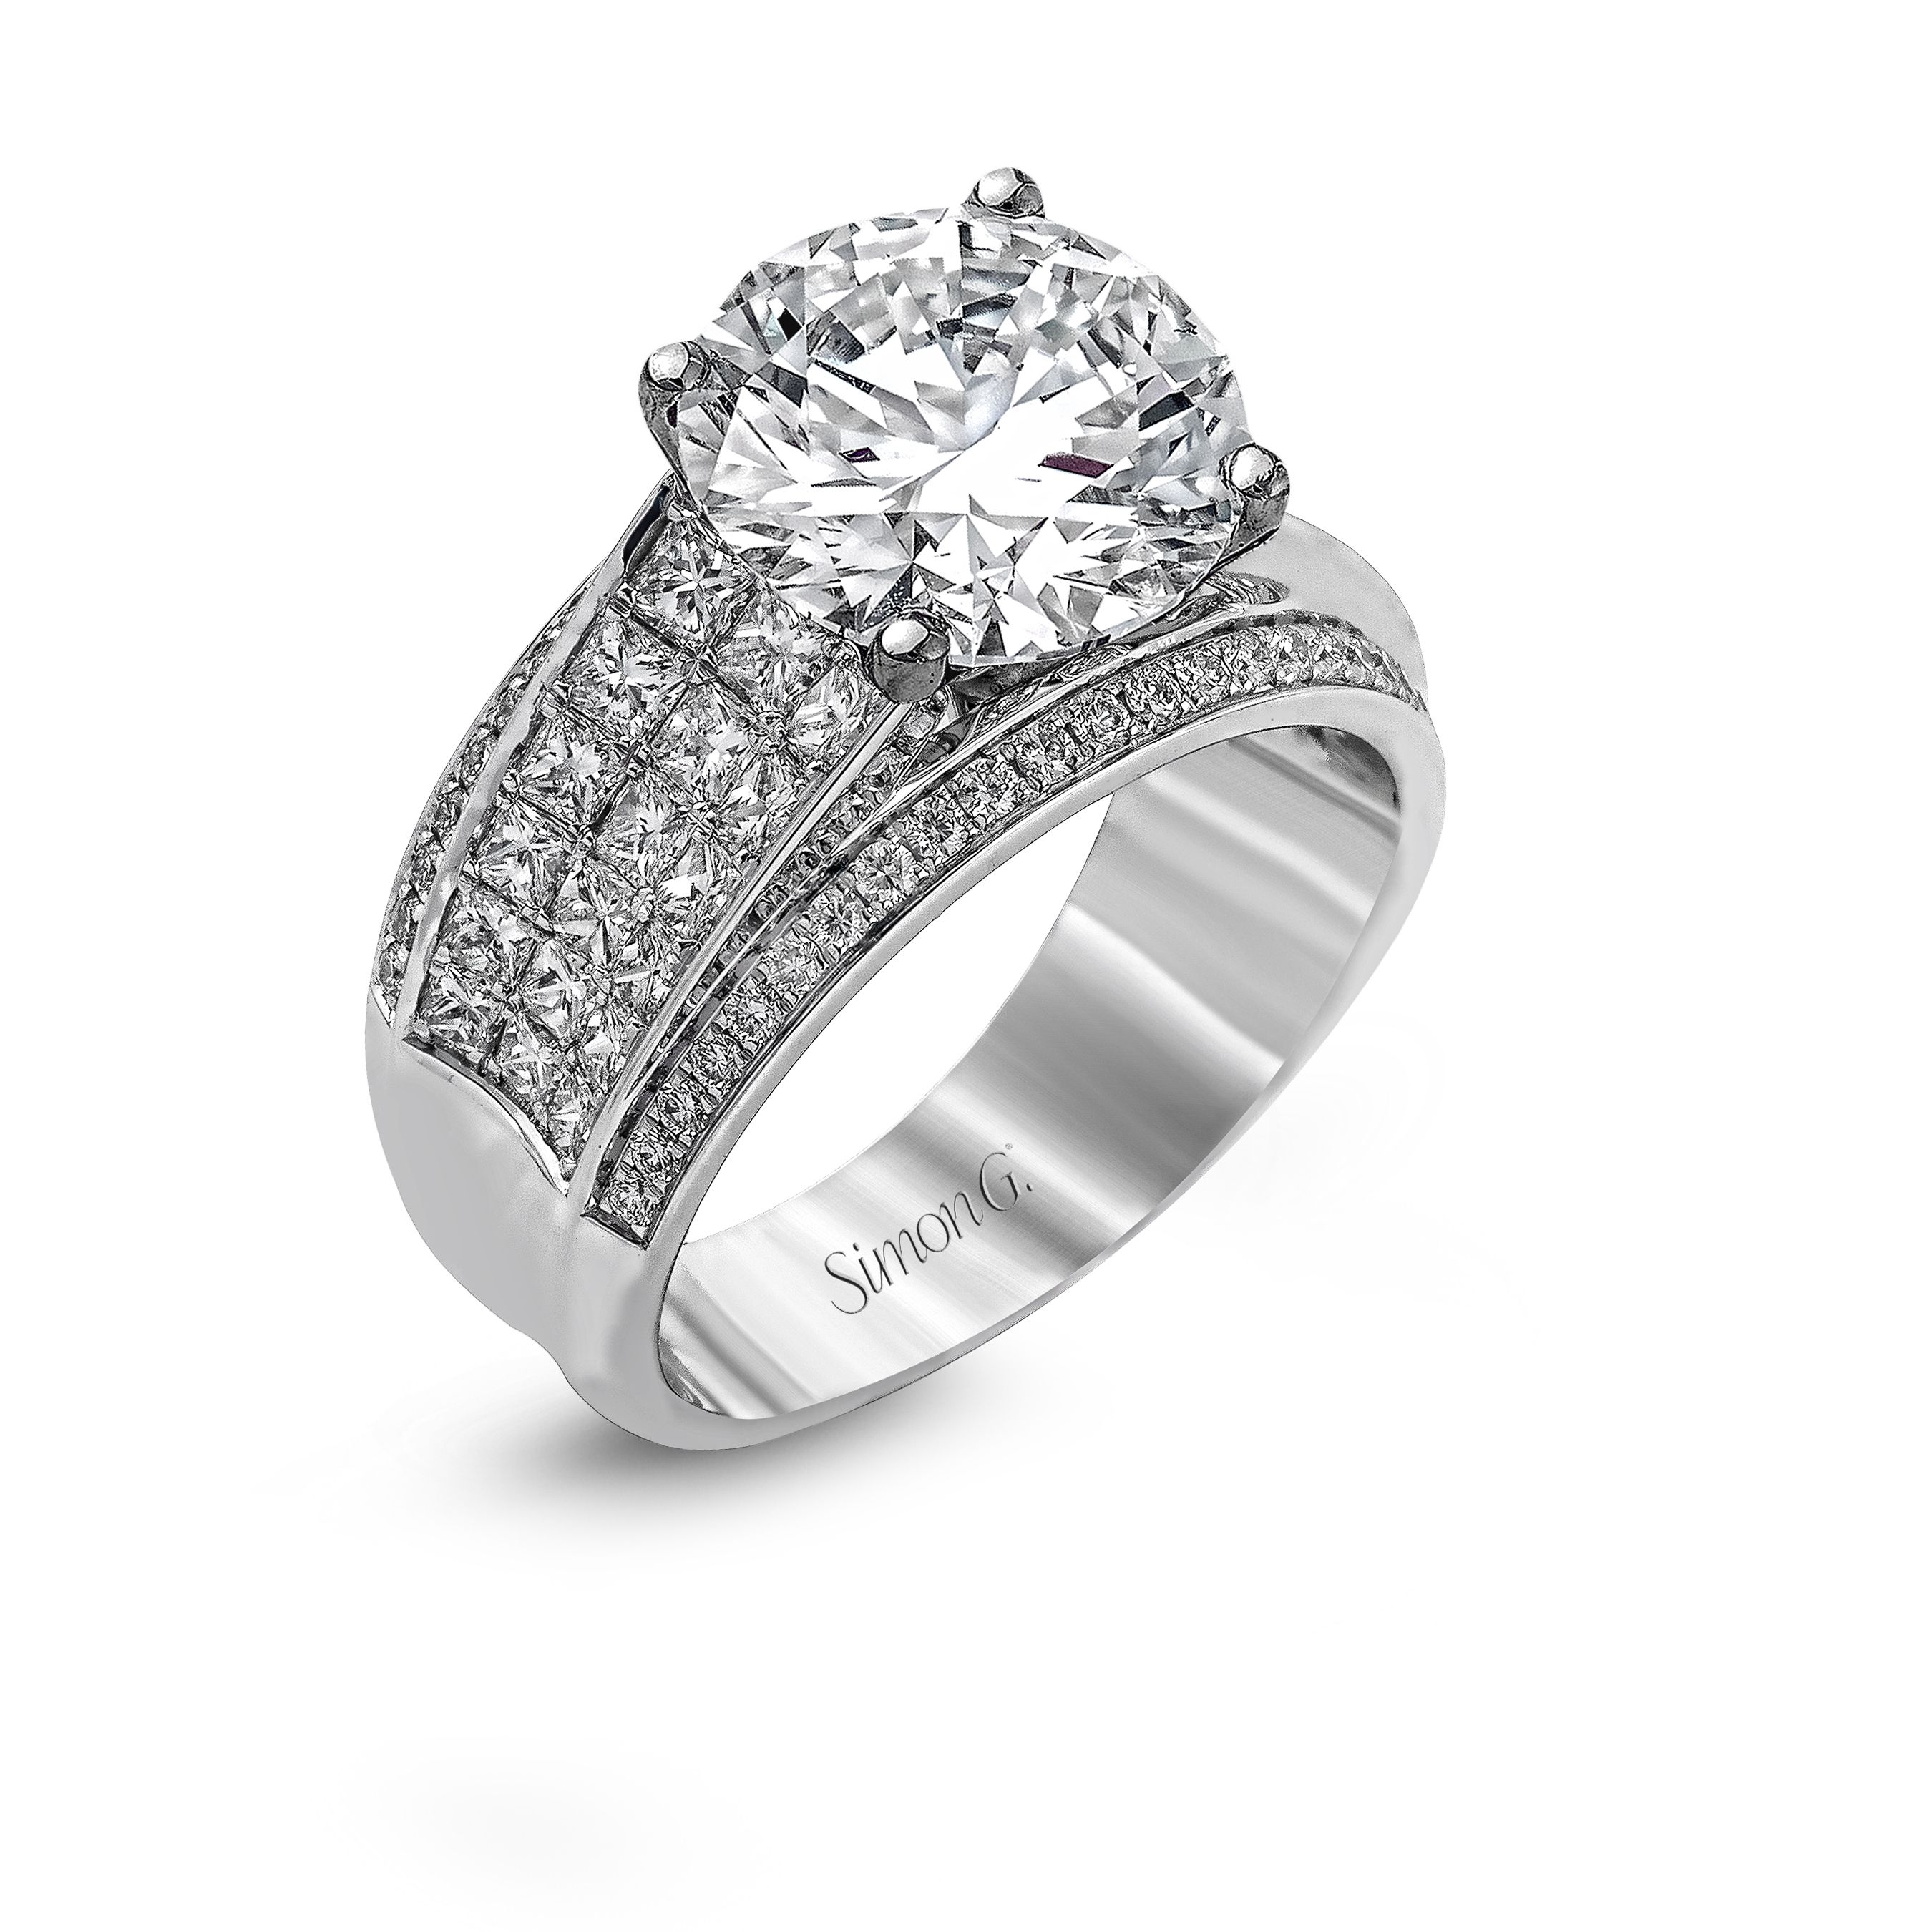 MR2141 Nocturnal Sophistication Collection White Gold Round Cut Engagement Ring